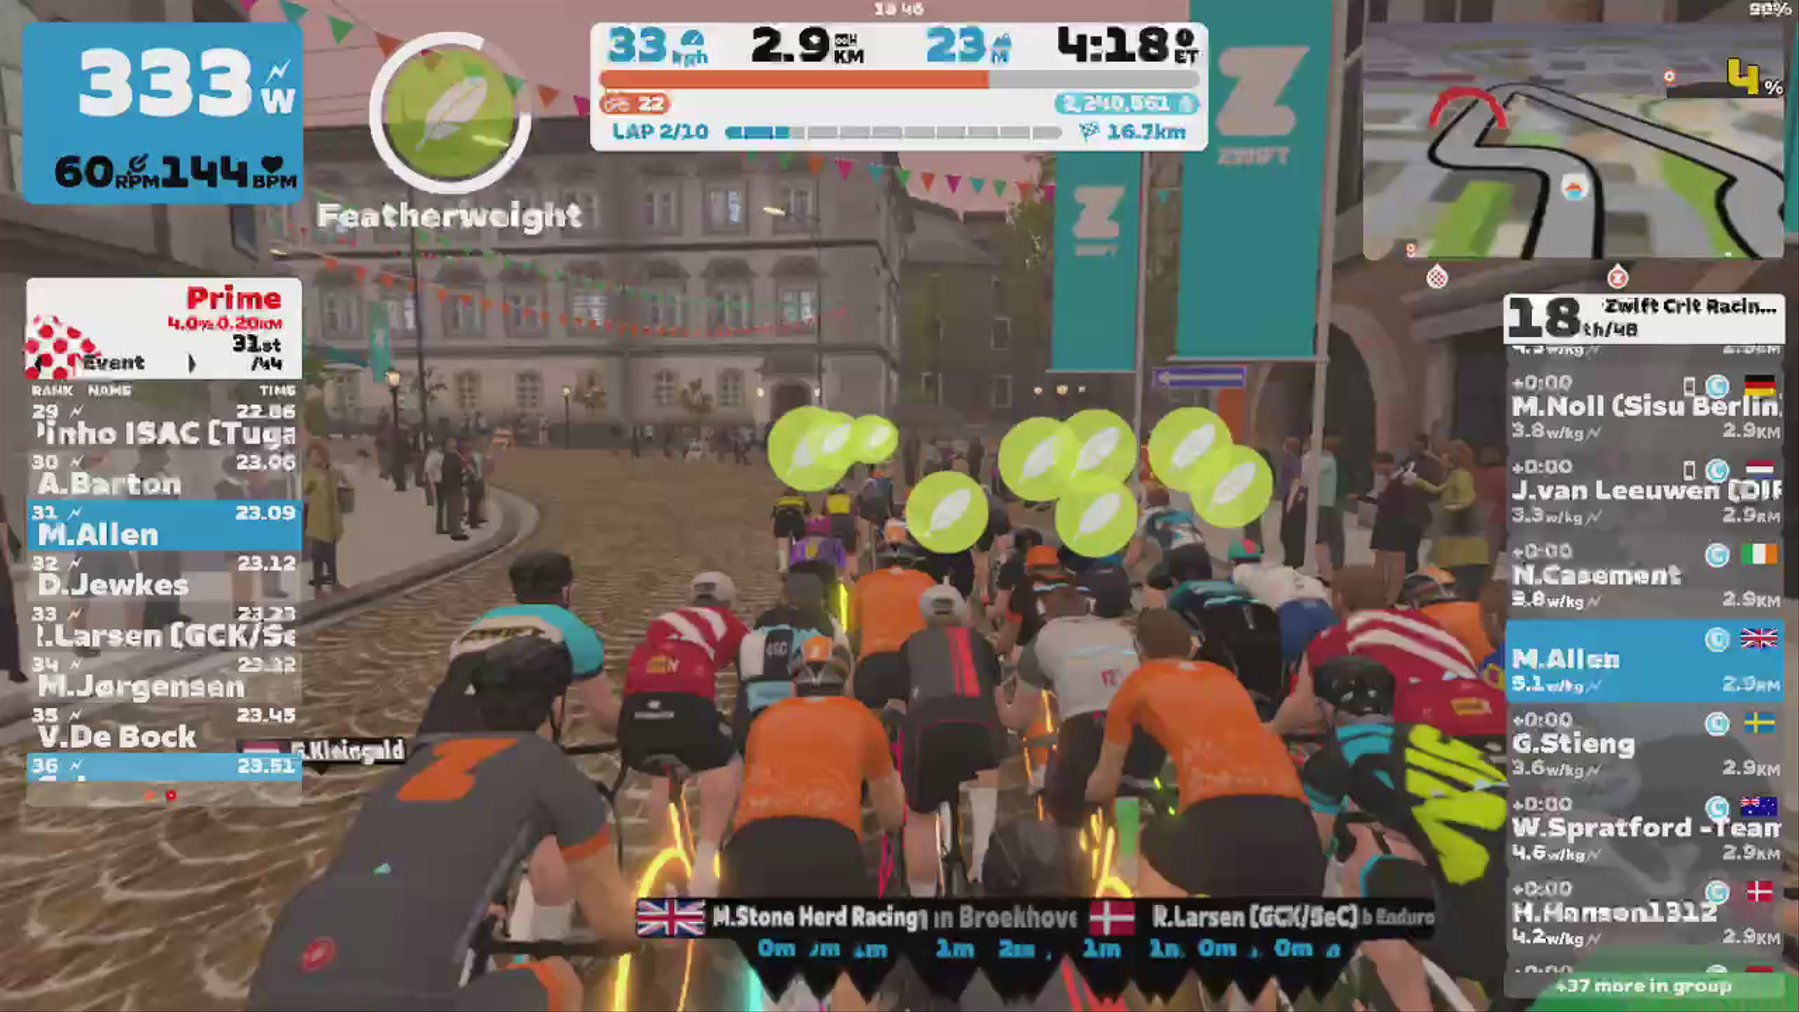 Zwift - Race: Zwift Crit Racing Club - Downtown Dolphin (C) on Downtown Dolphin in Crit City